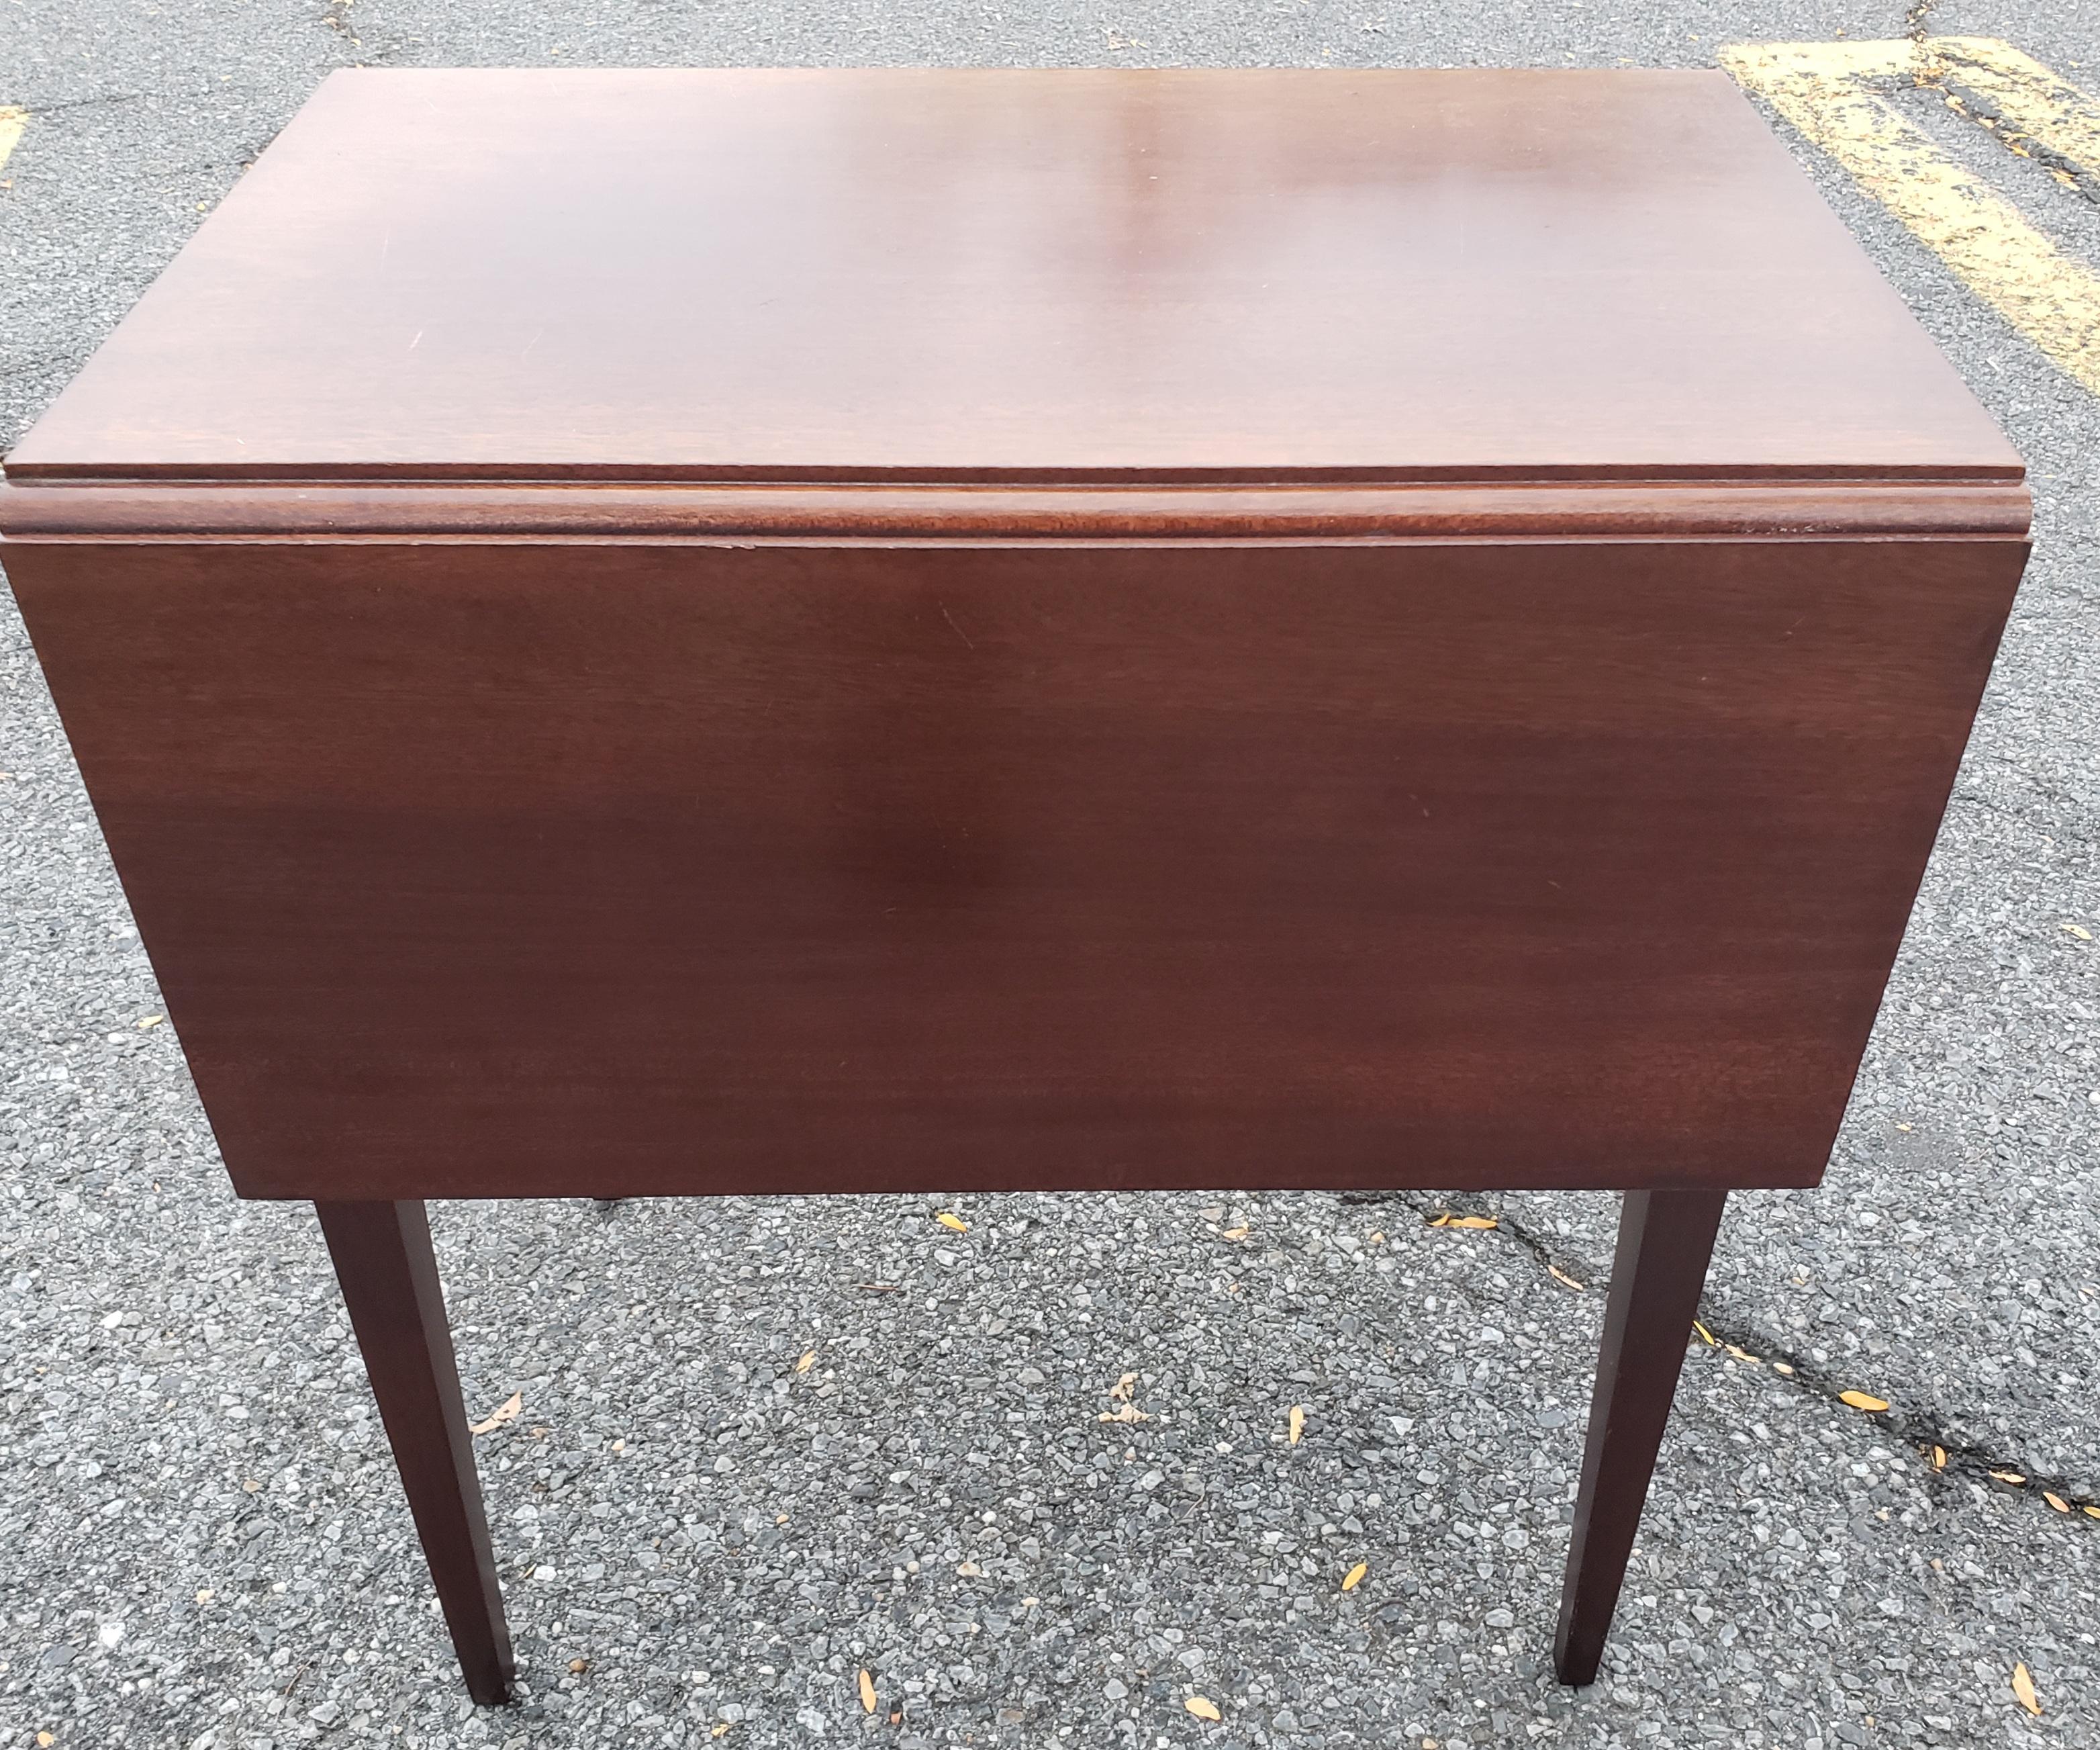 Craftique Vintage Mahogany Pembroke Hepplewhite Federal Side Tables, Pair In Good Condition For Sale In Germantown, MD